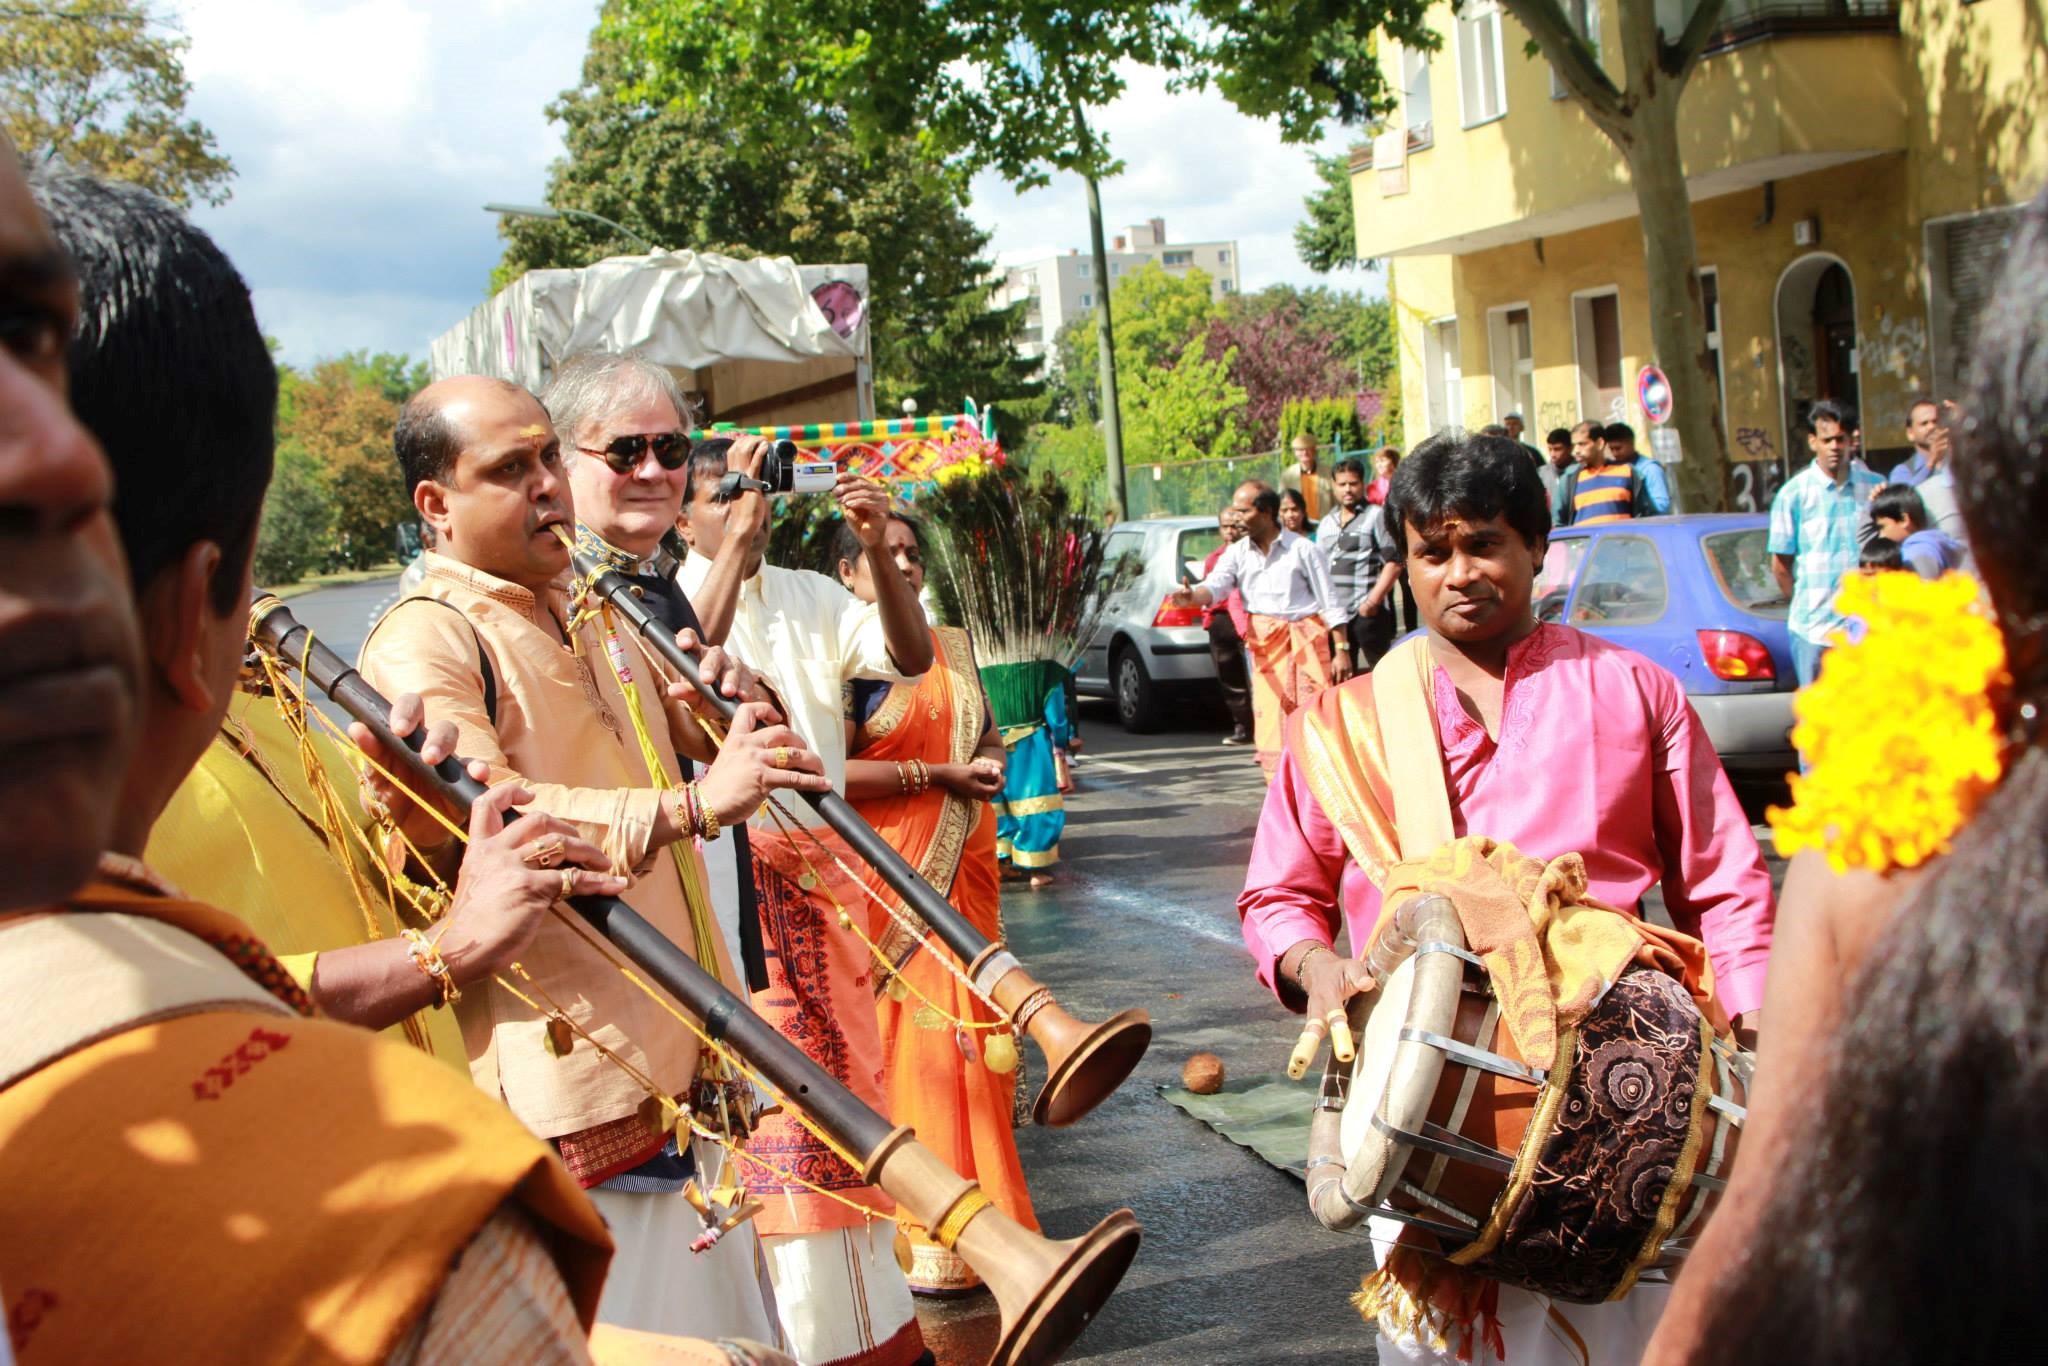 Musicians in traditional robes with their instruments.